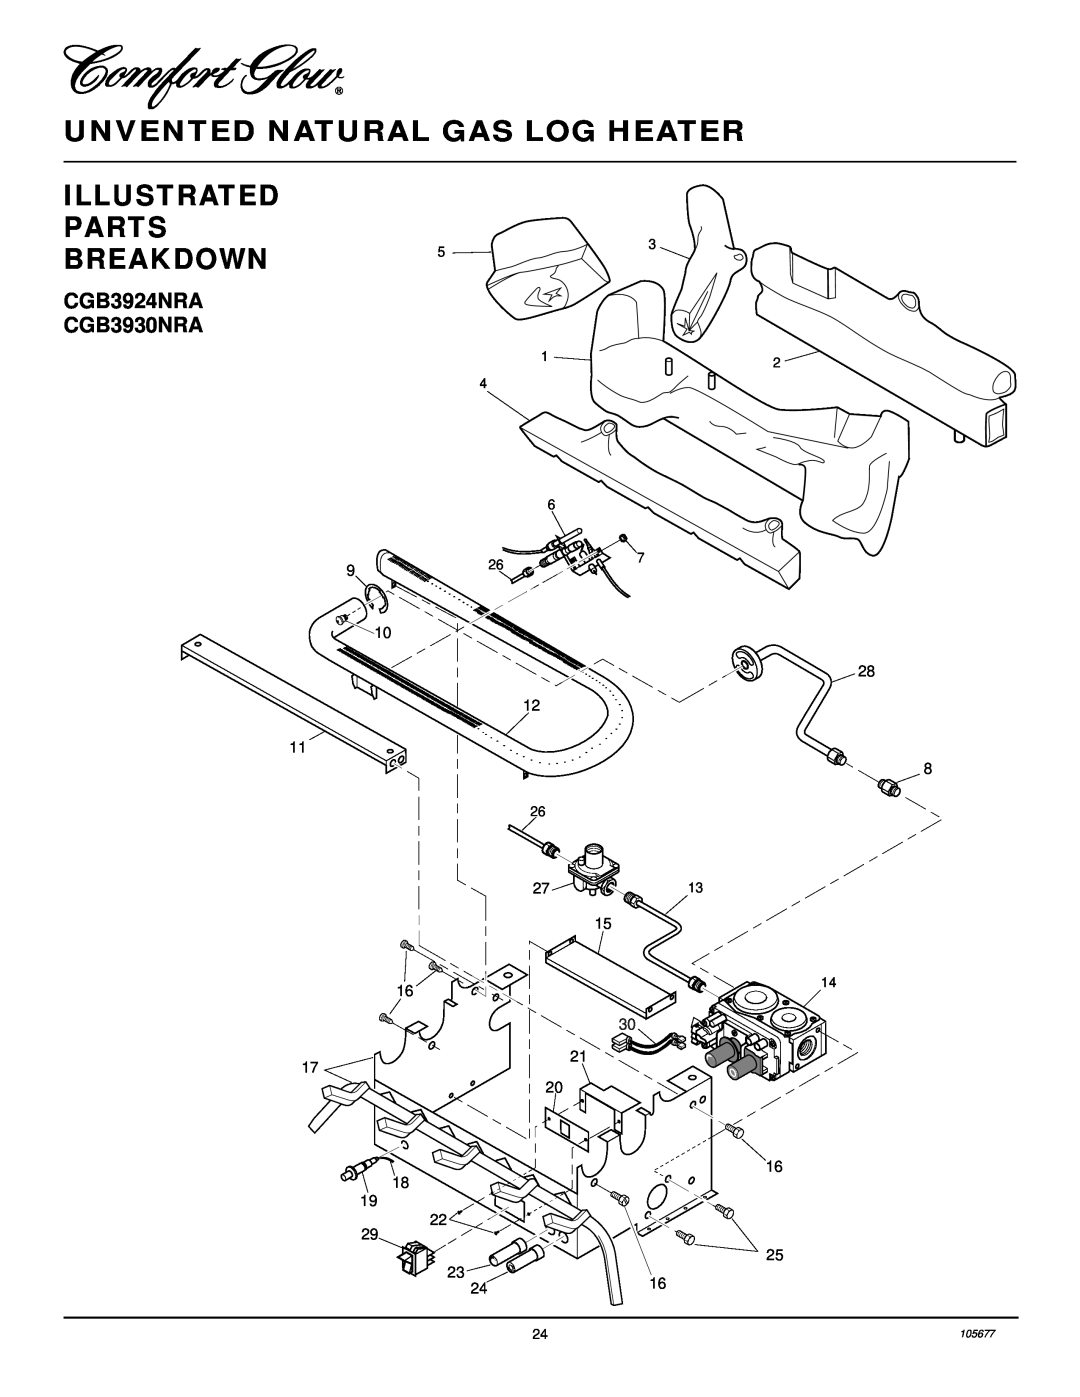 Desa CGD3924NRA installation manual Unvented Natural Gas Log Heater Illustrated Parts, Breakdown, CGB3924NRA CGB3930NRA 